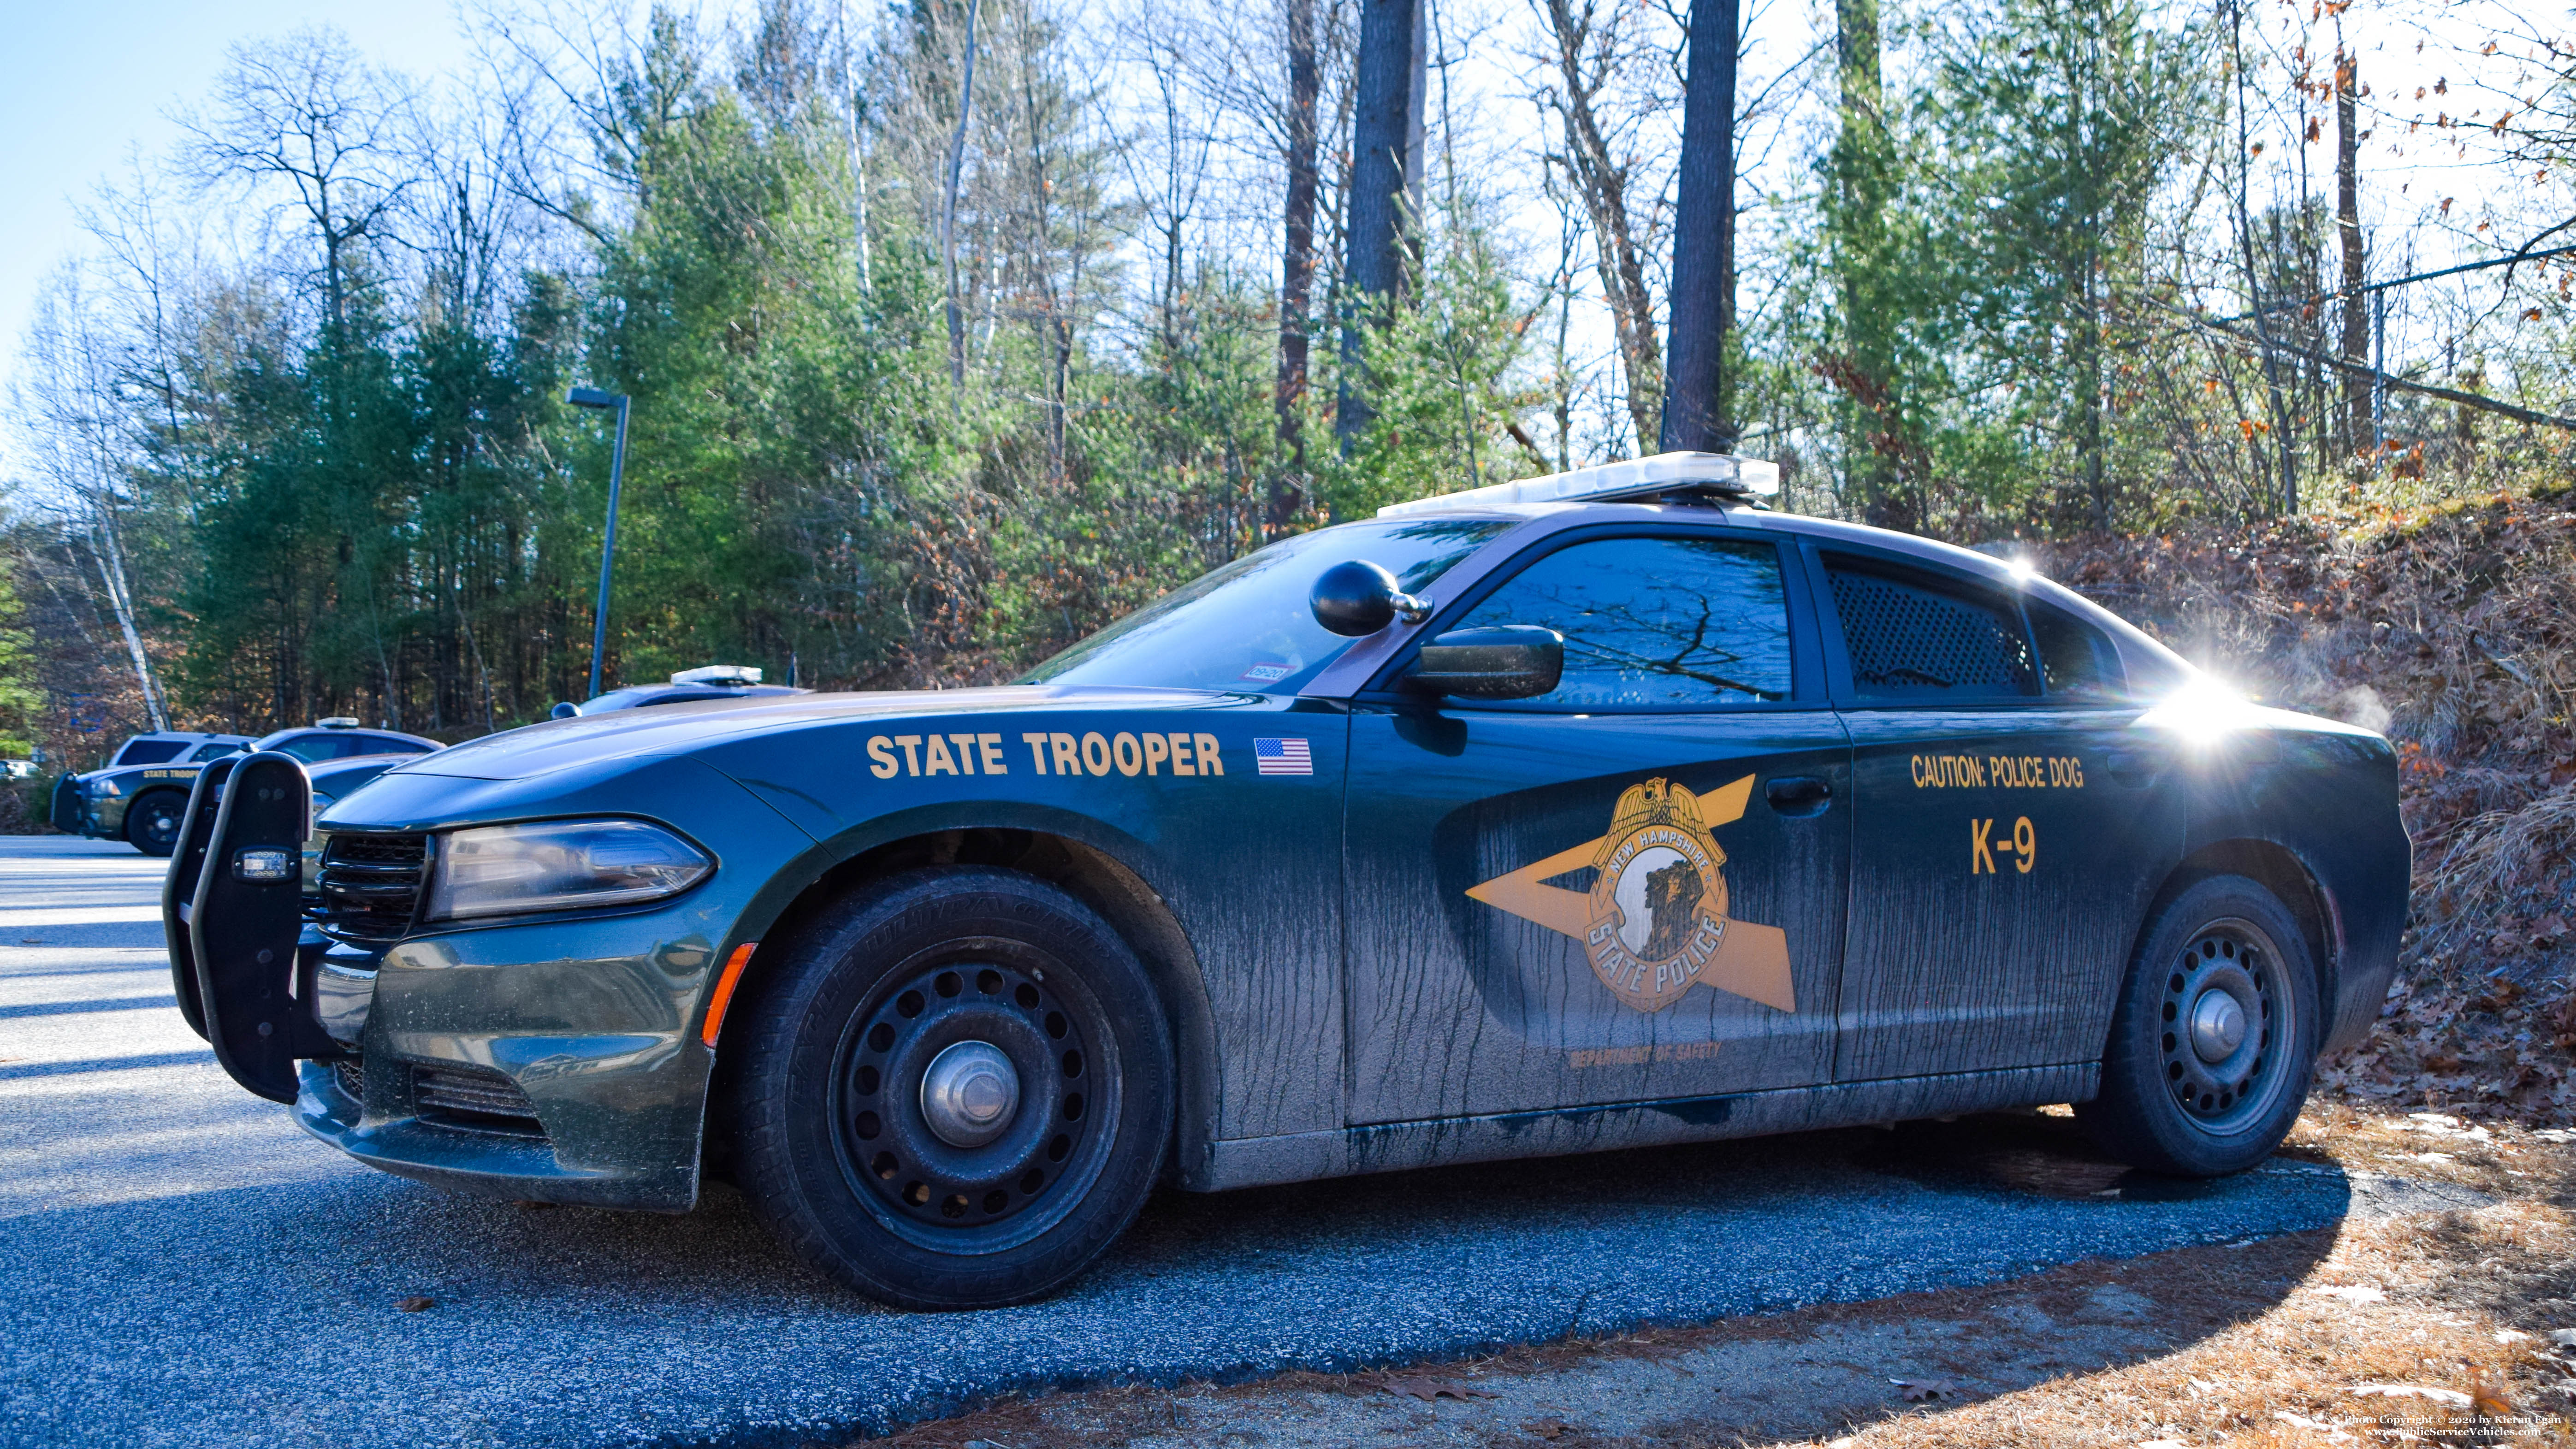 A photo  of New Hampshire State Police
            Cruiser 436, a 2015-2019 Dodge Charger             taken by Kieran Egan